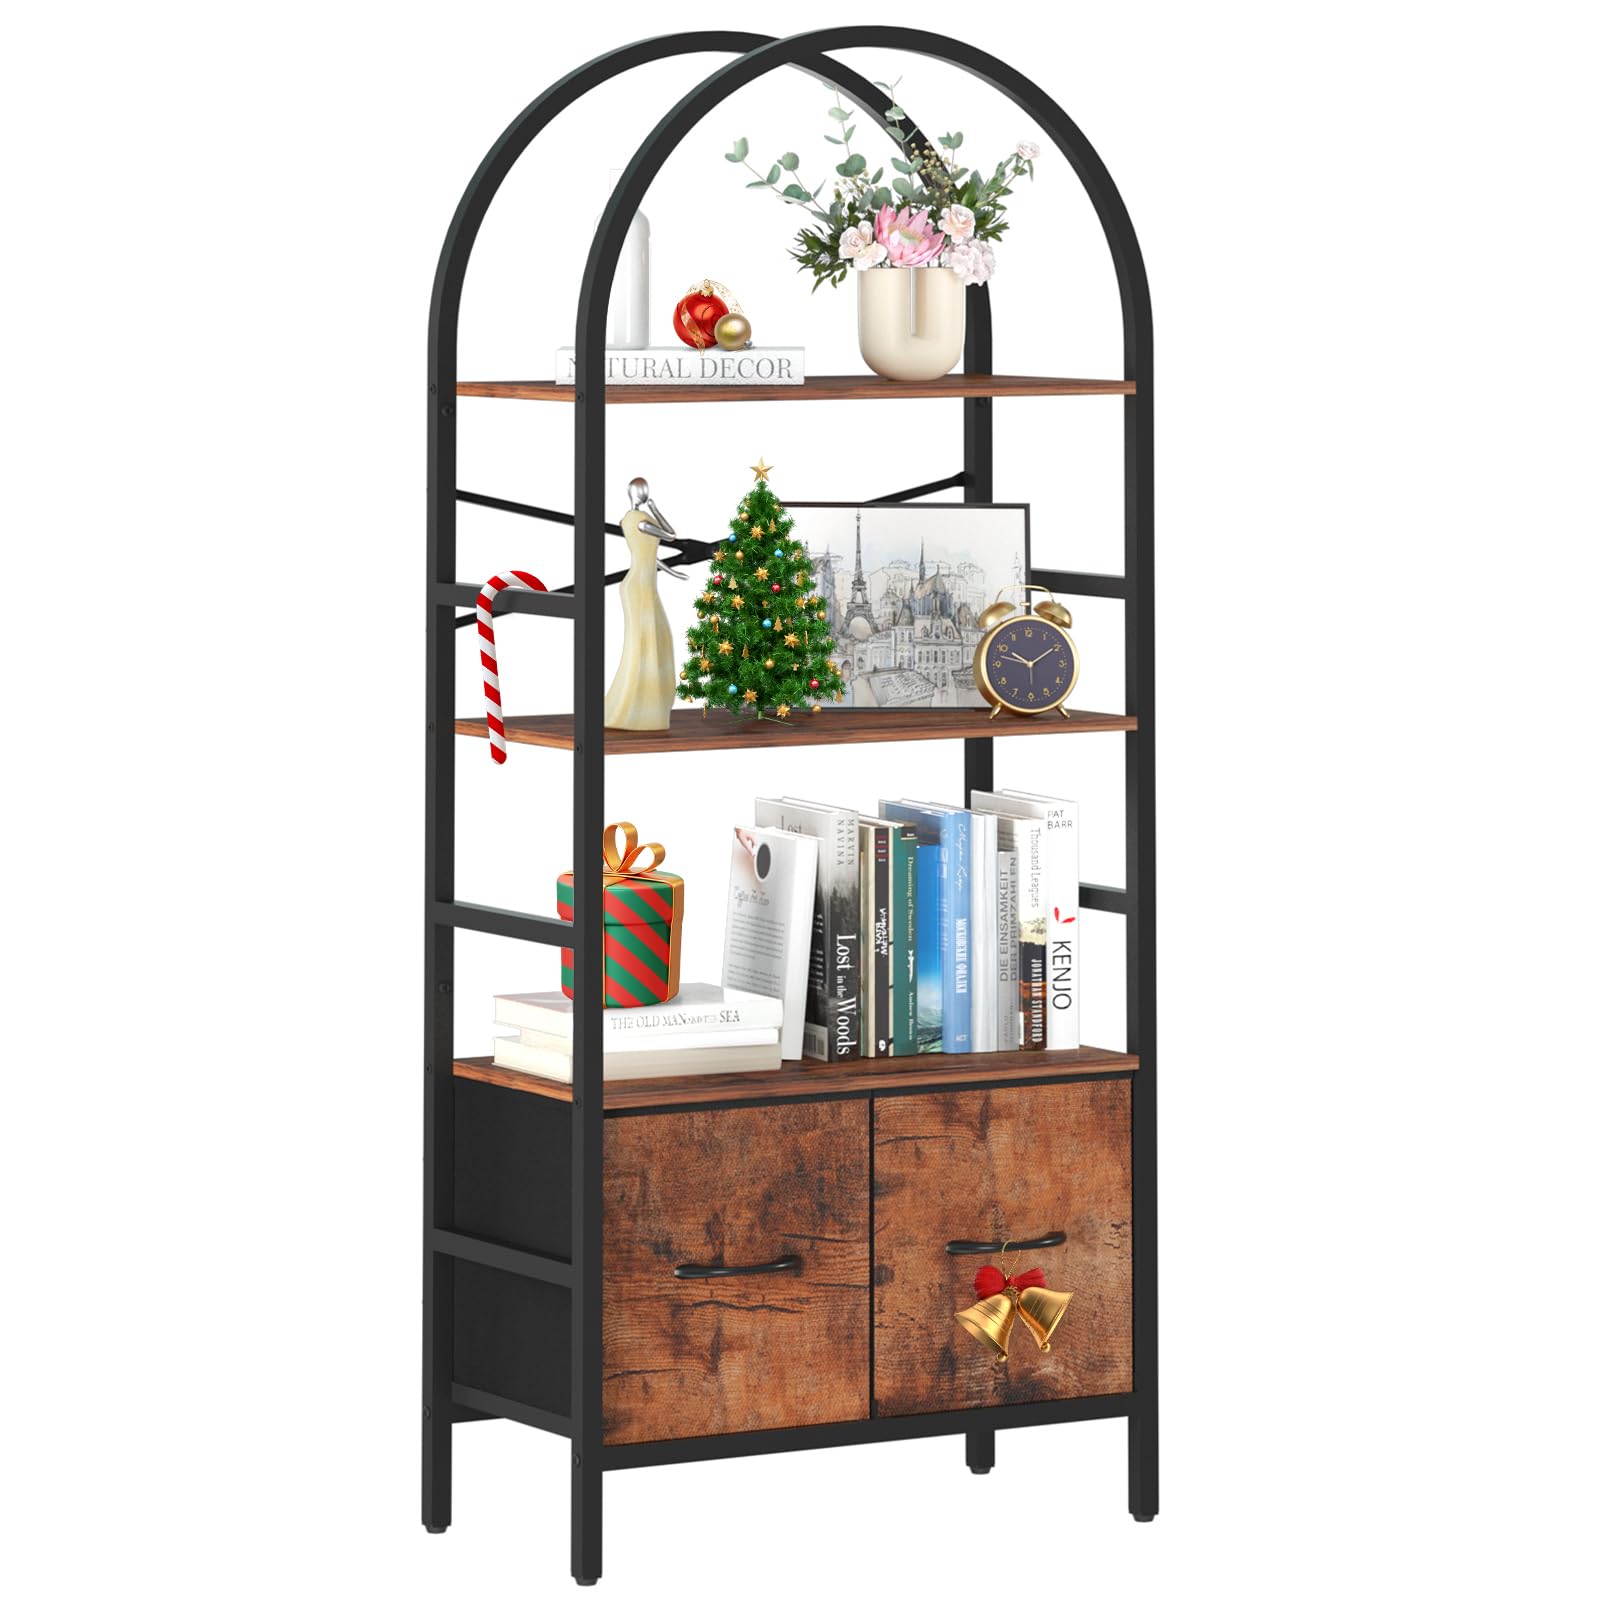 Yoobure Arched Bookshelf with Drawers, 4 Tier Book Shelf Storage Shelves, Industrial Bookcase Book Organizer for Bedroom Office, Tall Metal Bookshelves $56